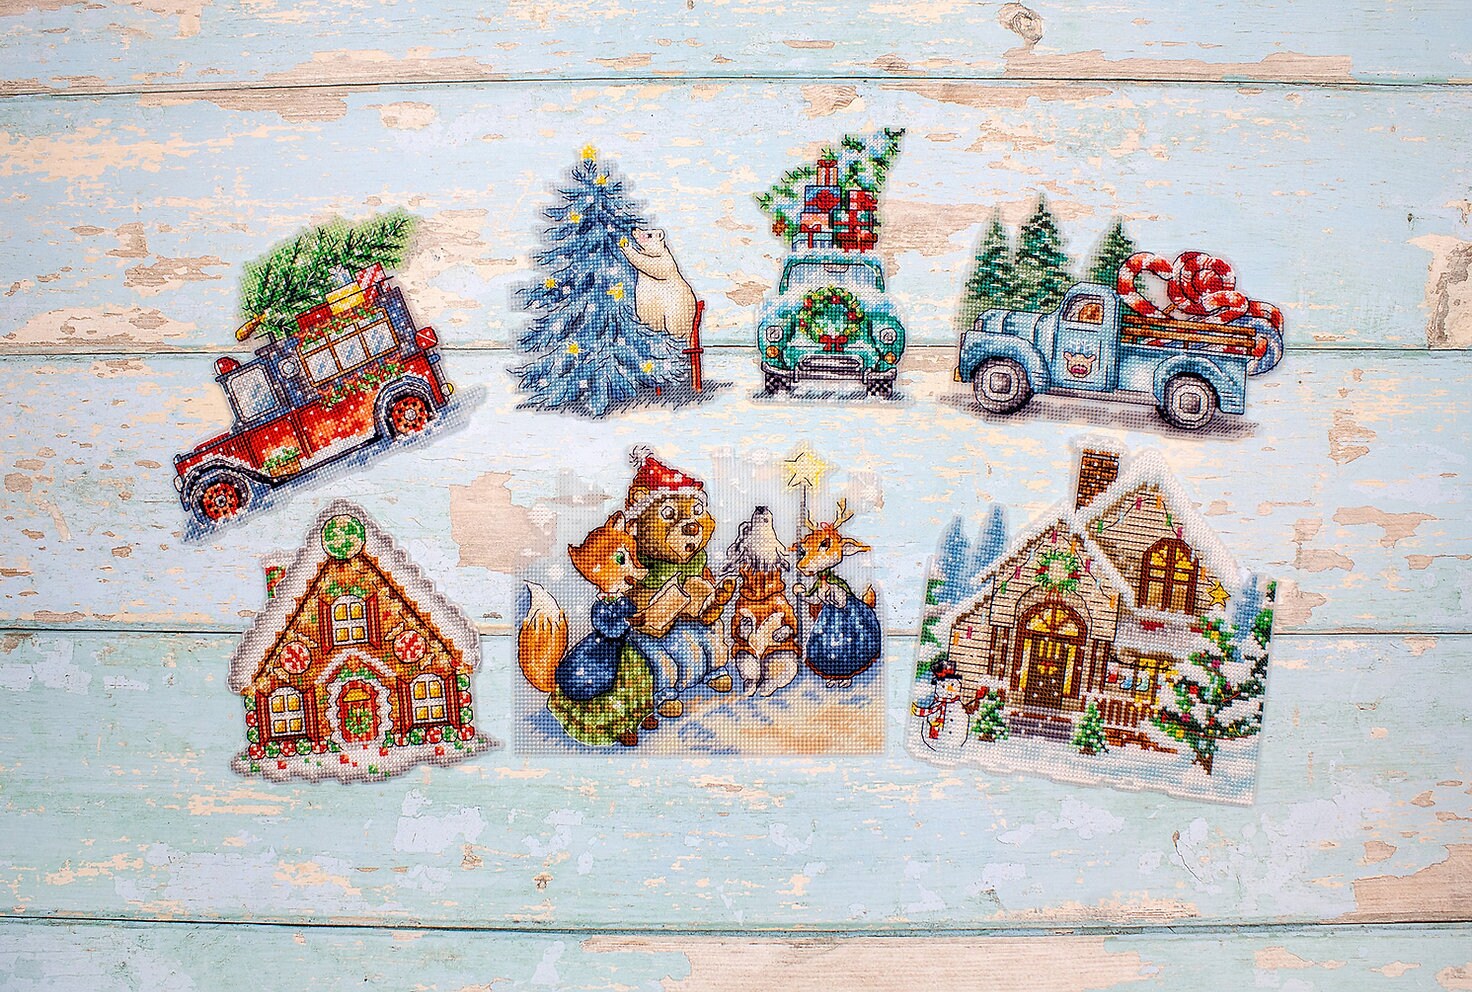 Christmas Ornaments Kit L8051 Counted Cross Stitch Kit